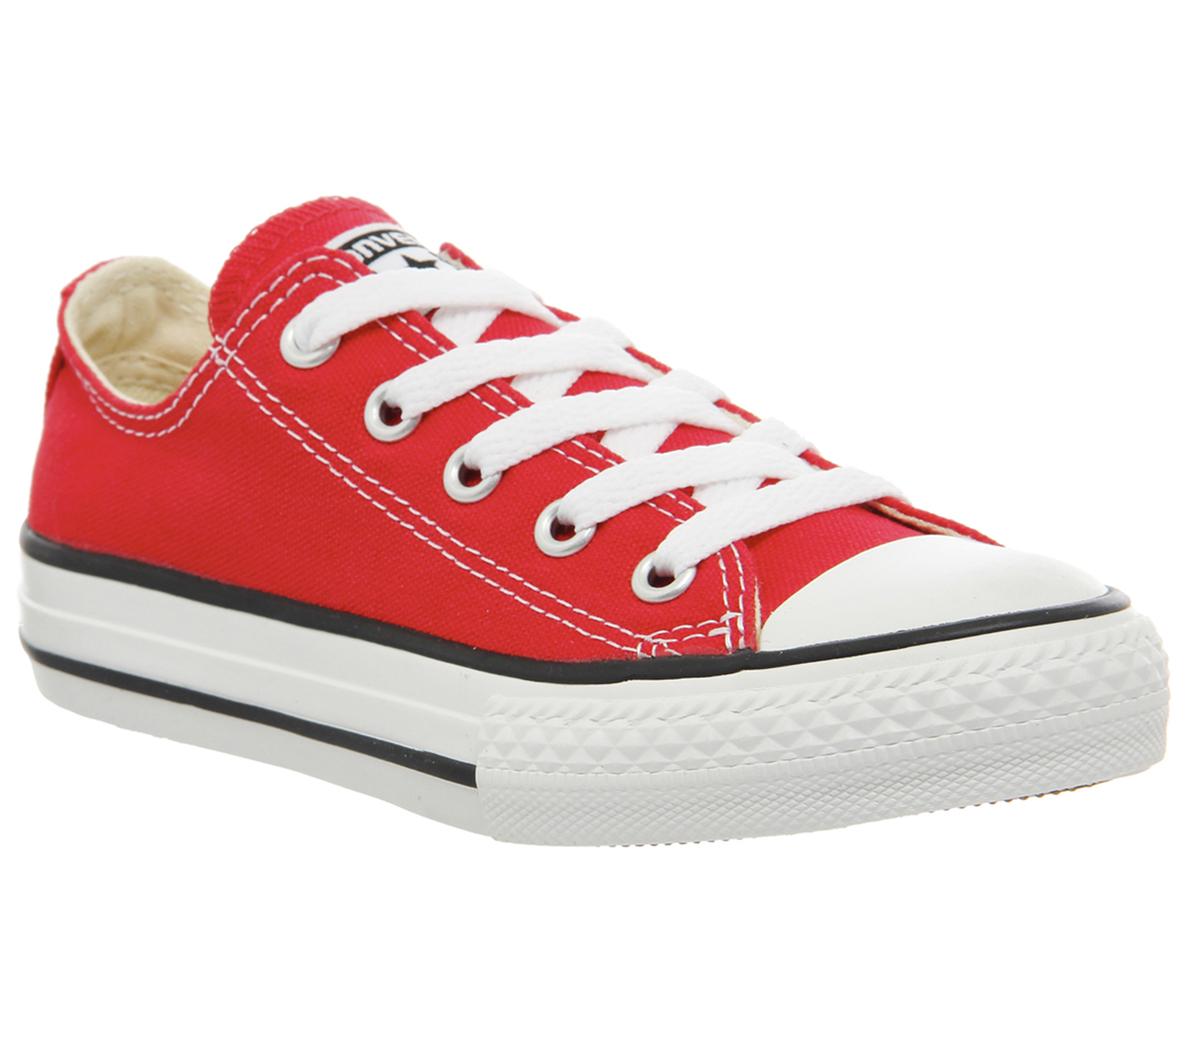 ConverseAll Star Low YouthRed